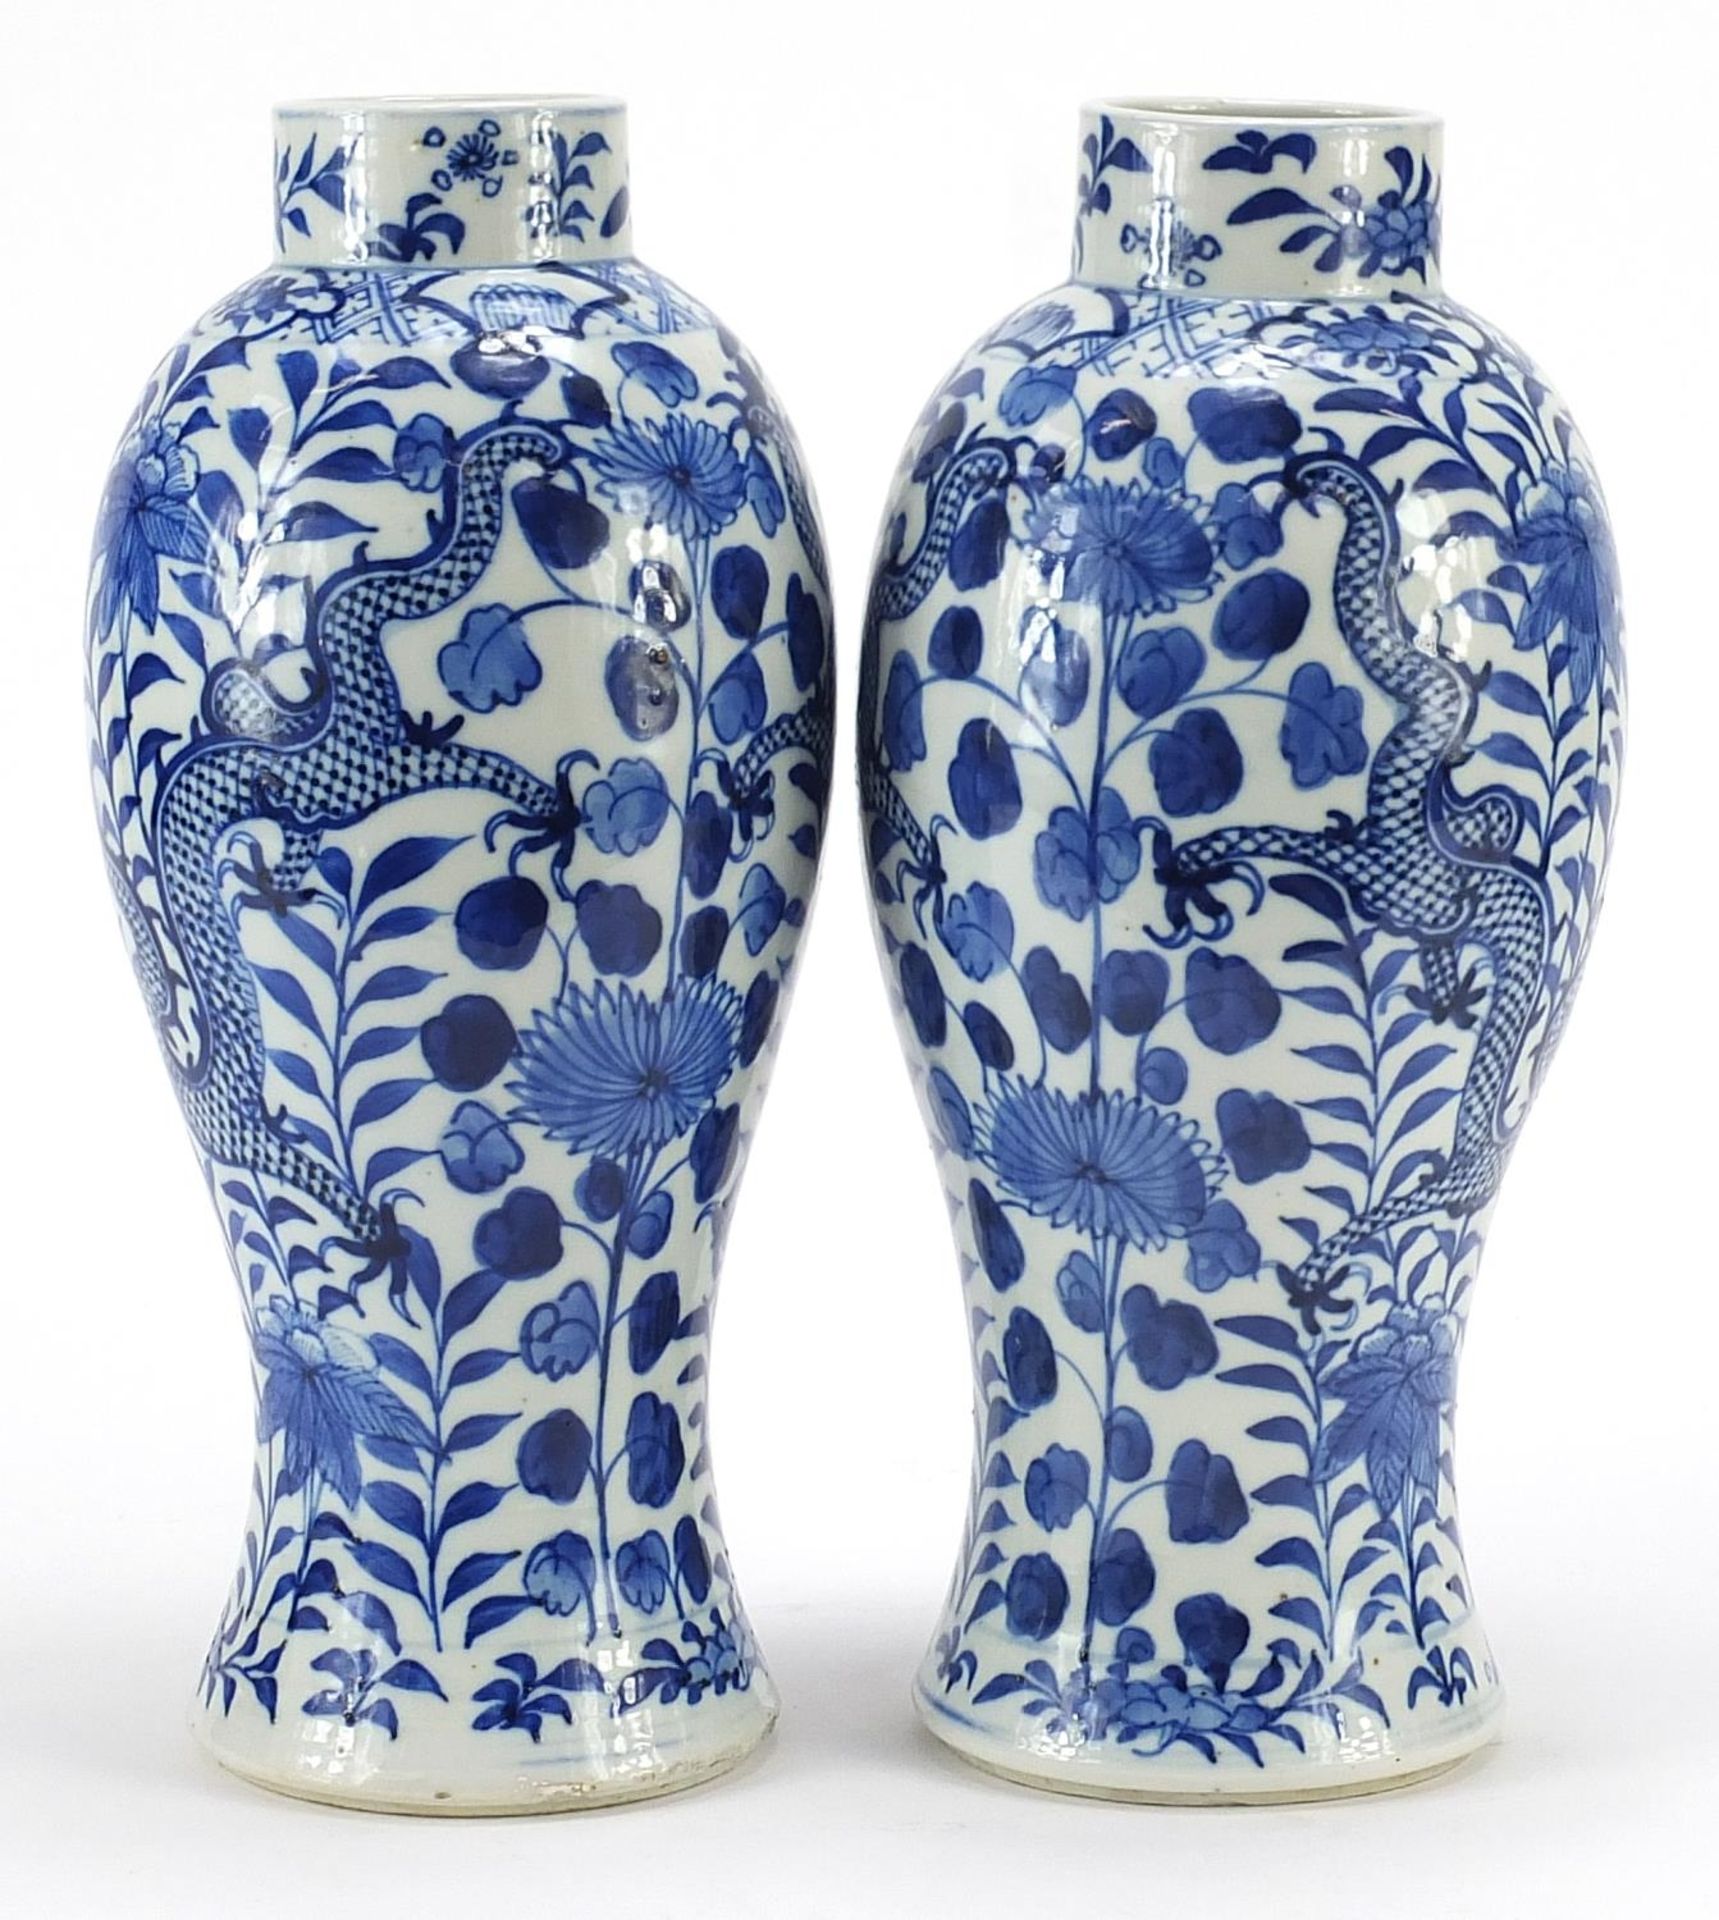 Pair of Chinese blue and white porcelain baluster vases hand painted with dragons amongst flowers, - Image 2 of 3